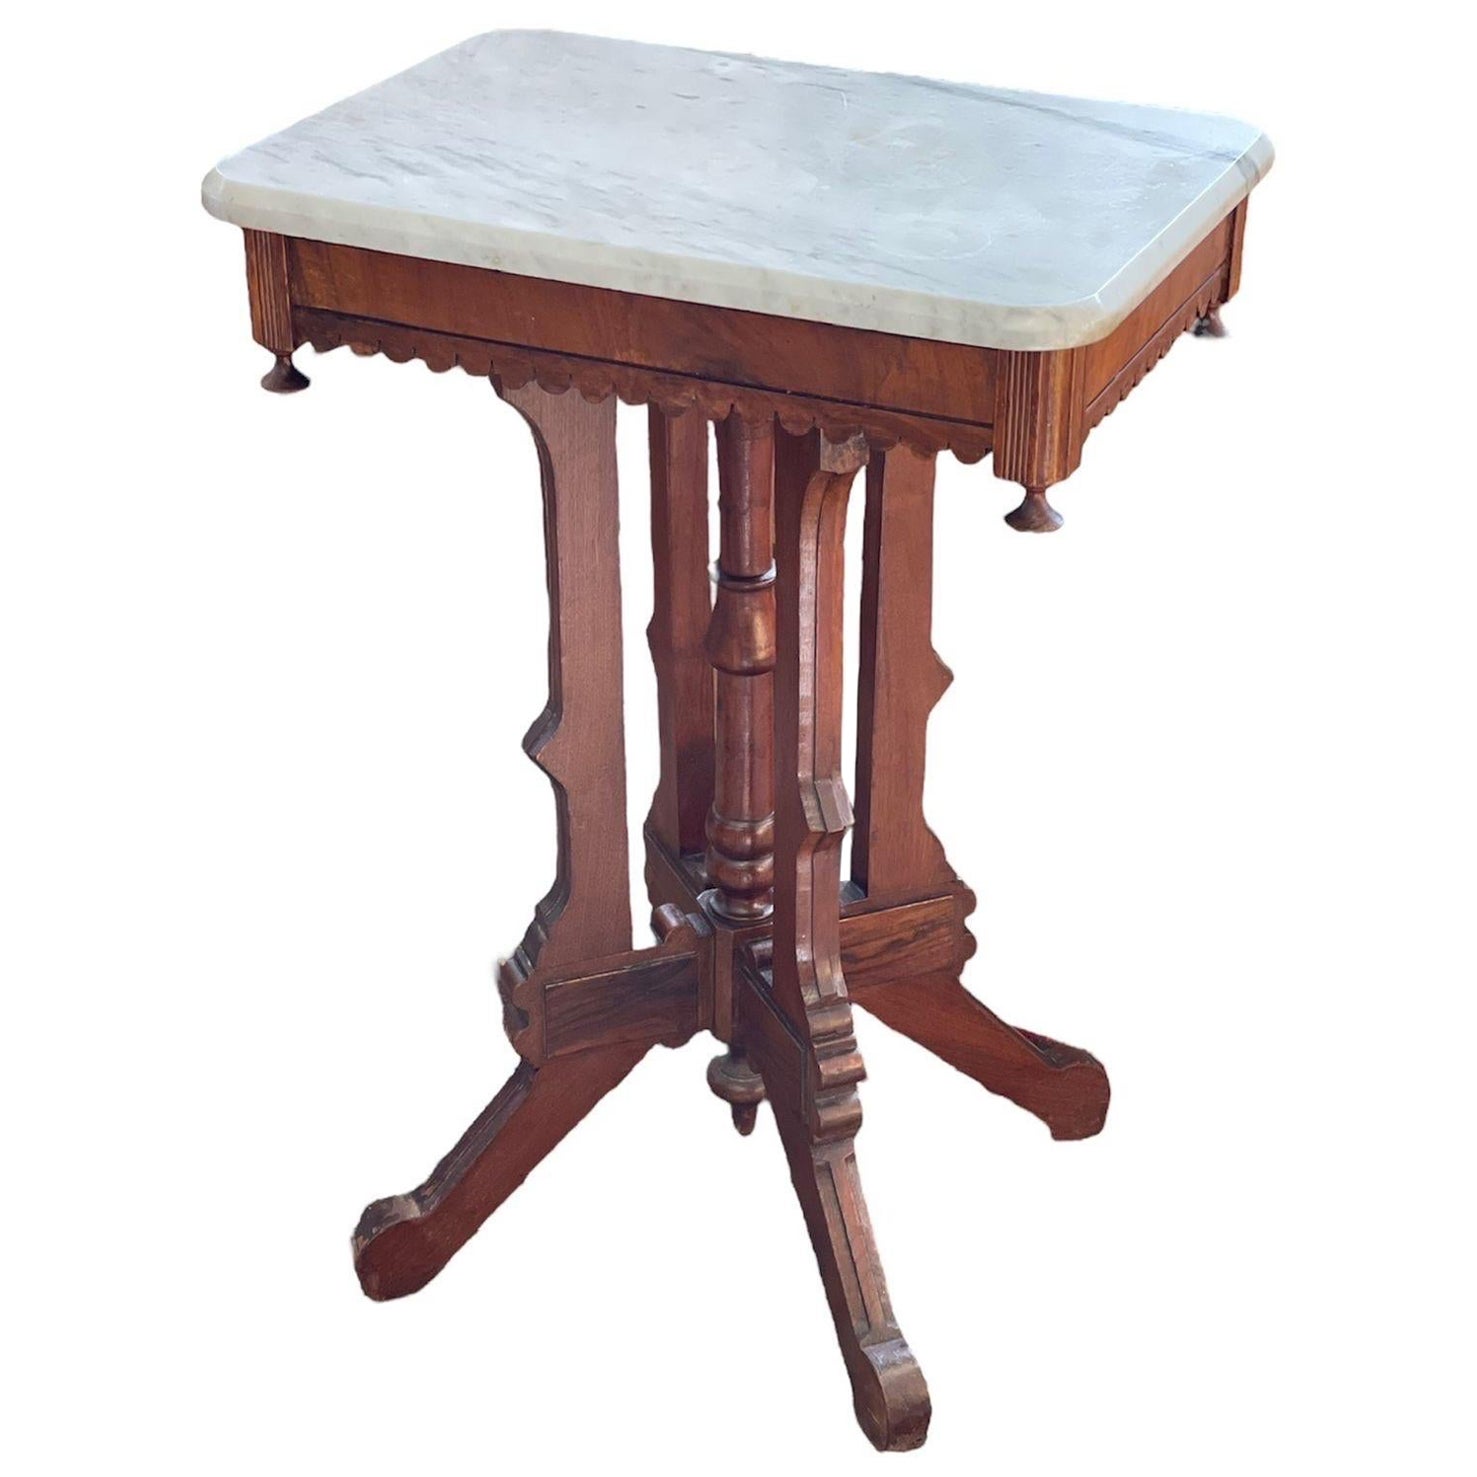 Vintage Table with Stone Top and Casters